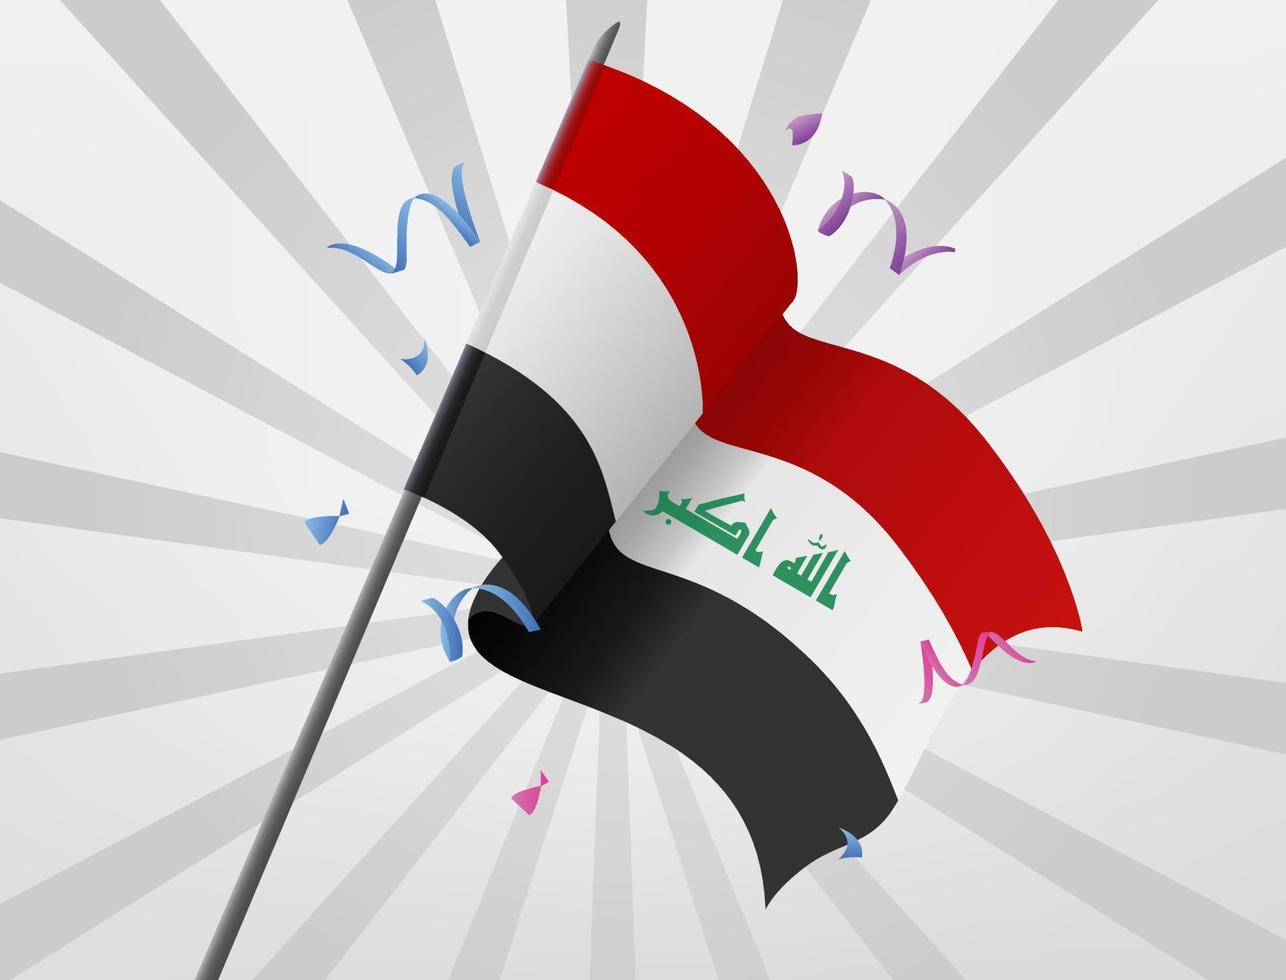 The celebratory flag of Iraq is flying at heights vector